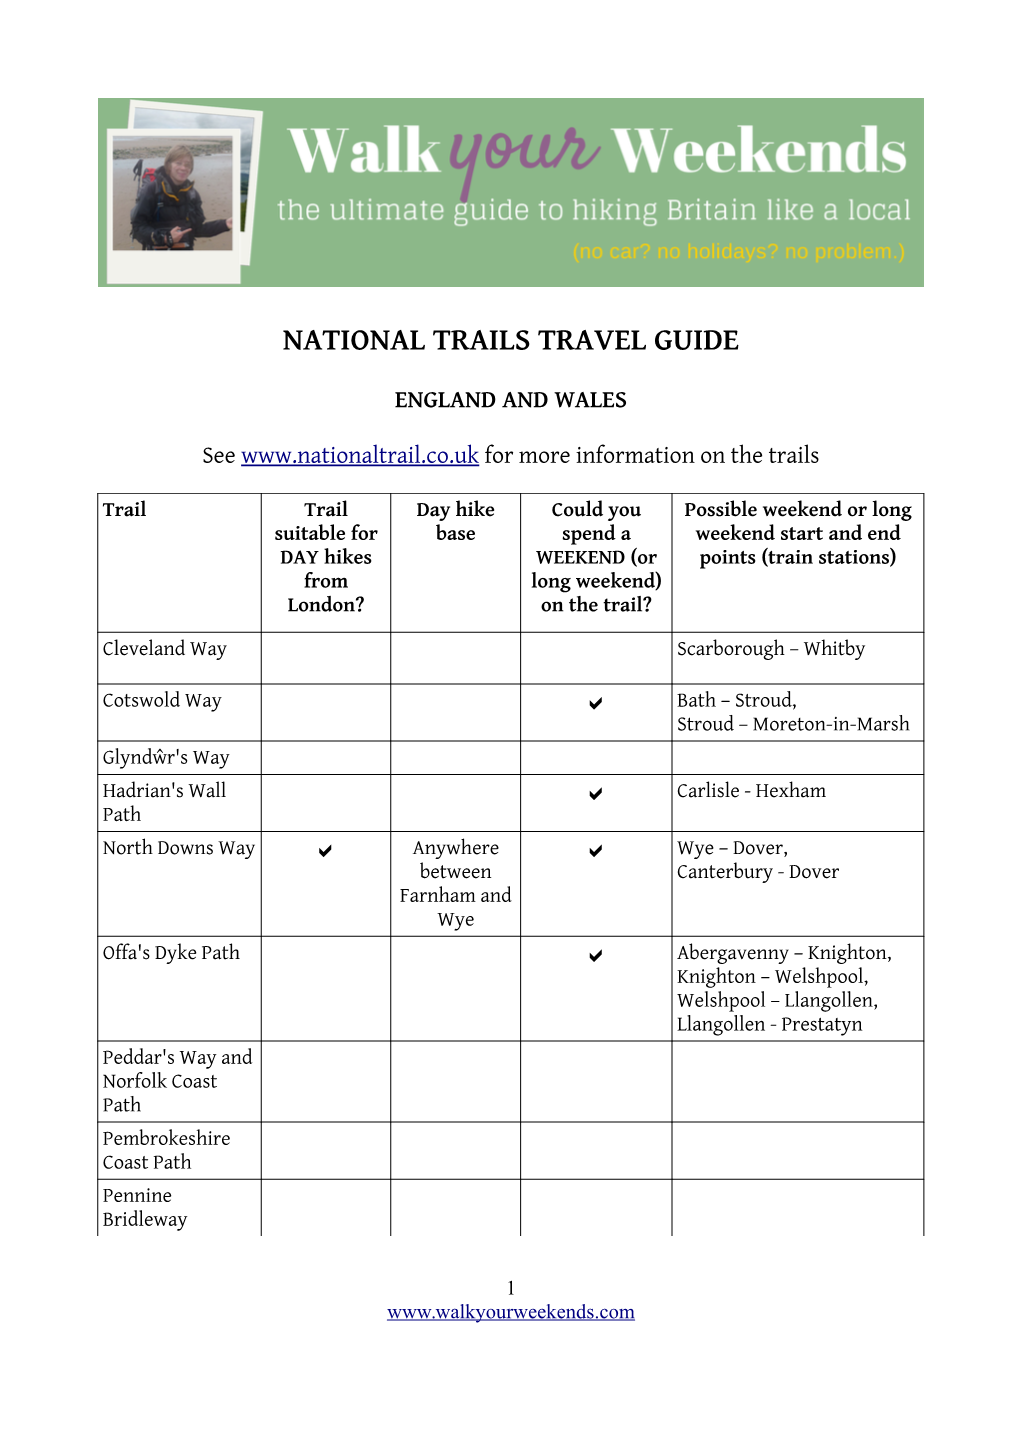 National Trails Travel Guide